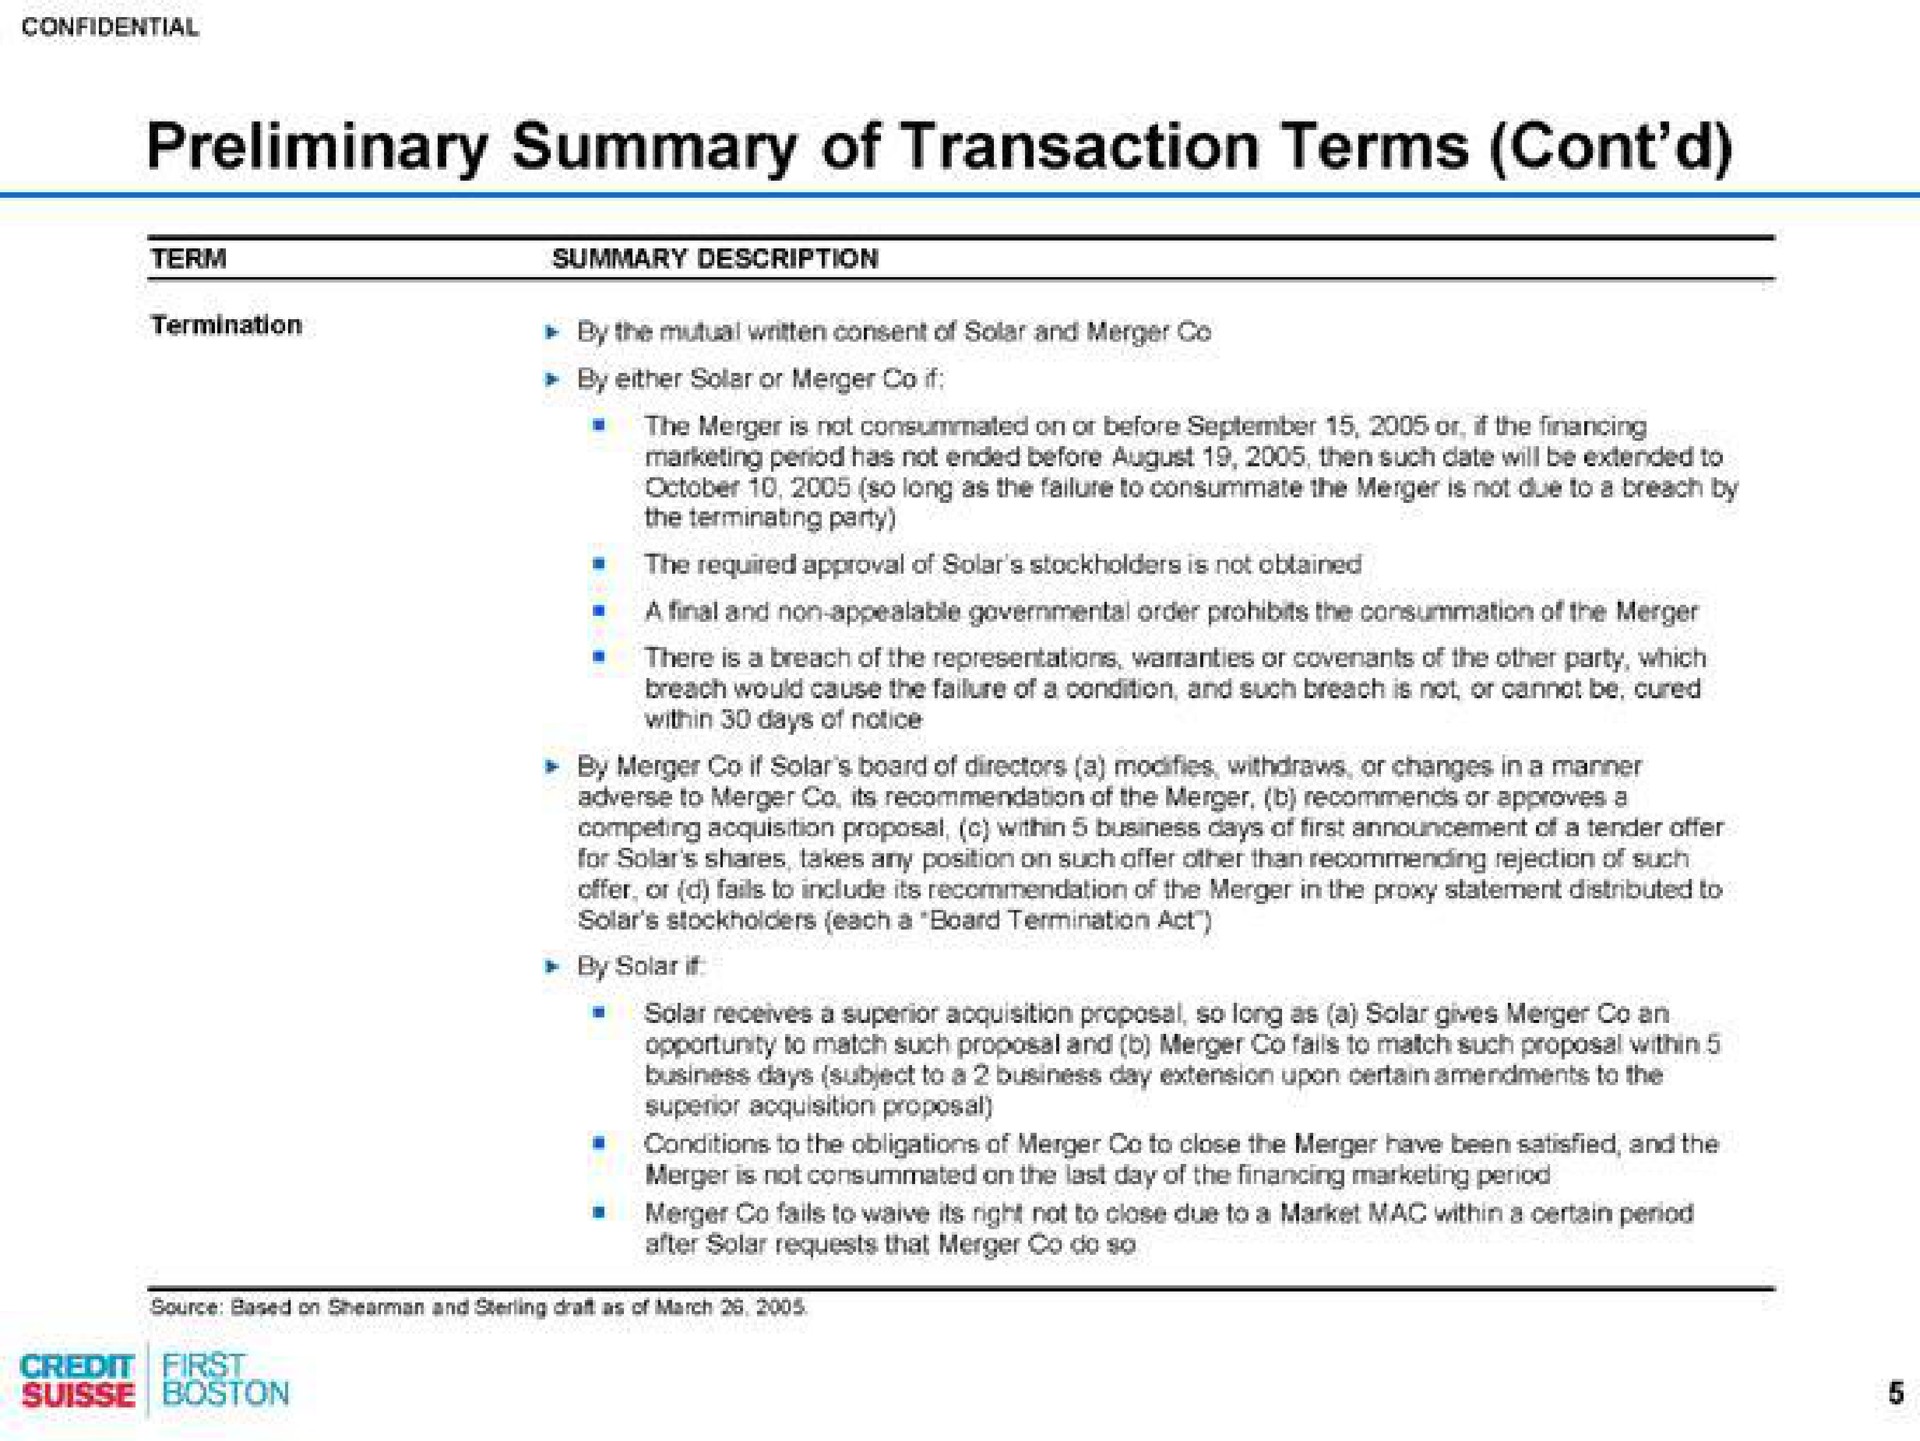 preliminary summary of transaction terms | Credit Suisse